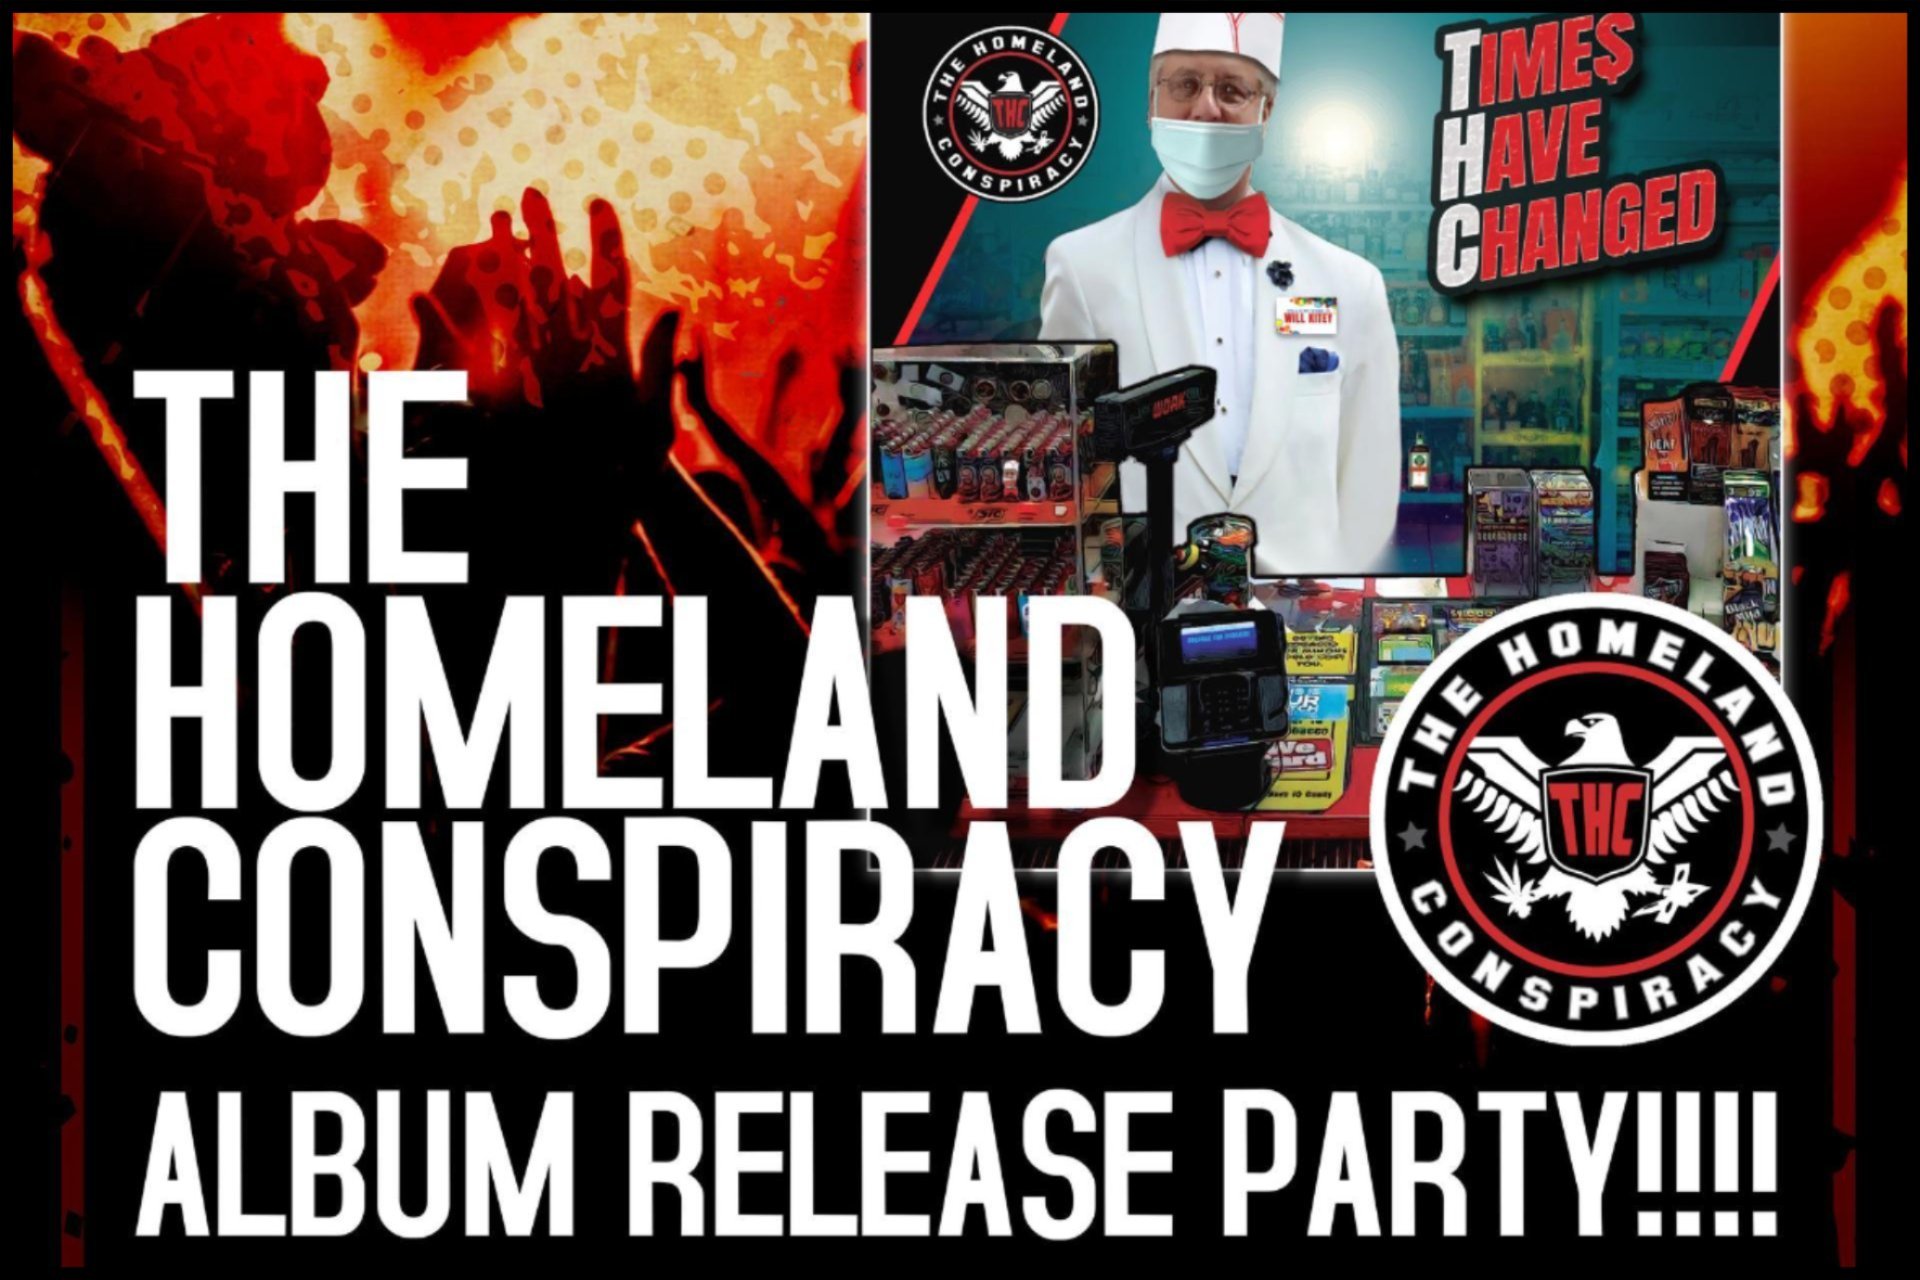 The Homeland Conspiracy's “Time$ Have Changed” Album Release Party